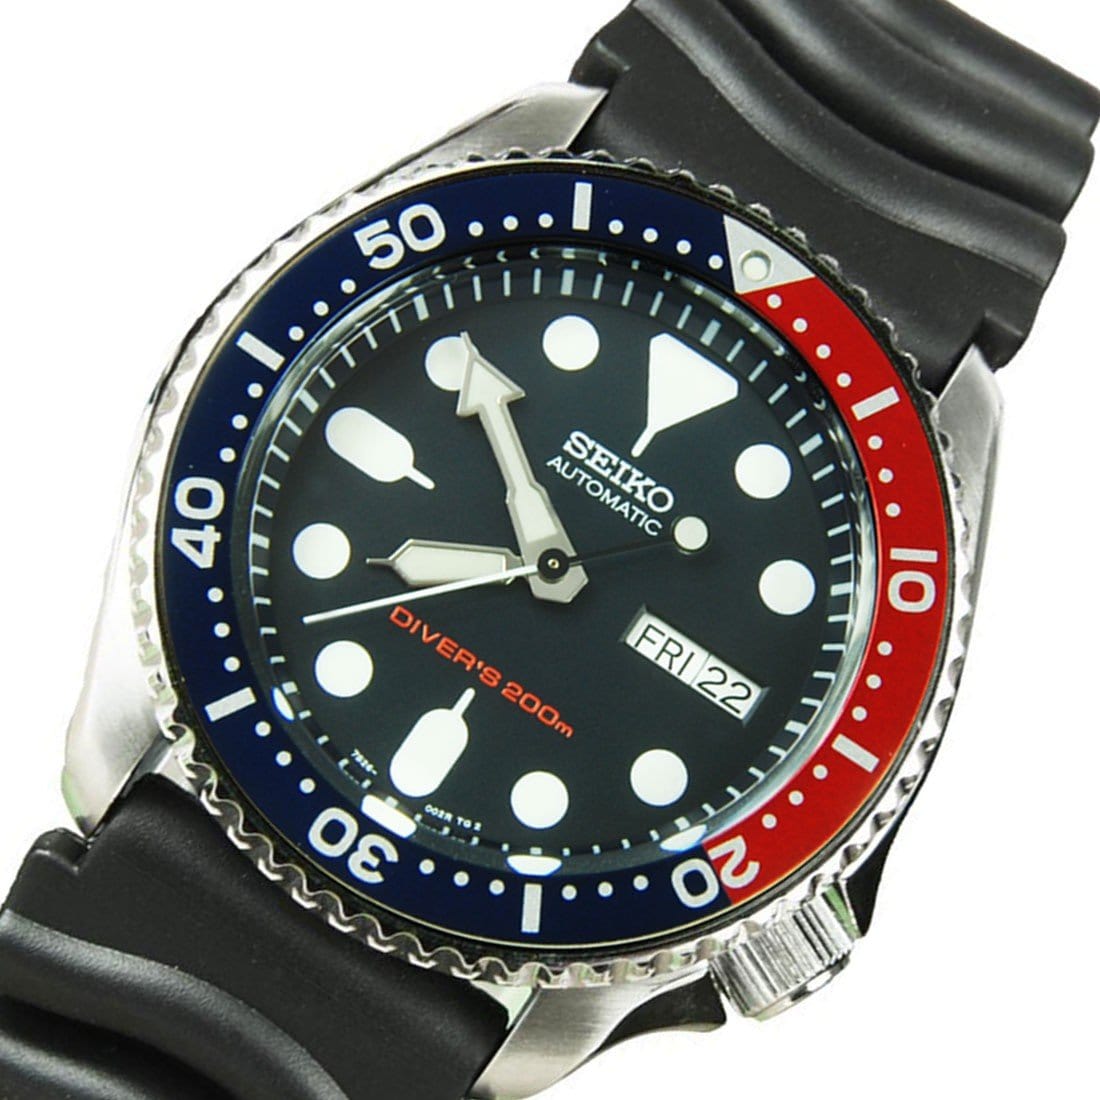 SKX009K1 SKX009K Seiko Automatic 200M Mens Dive Watch with Extra Strap